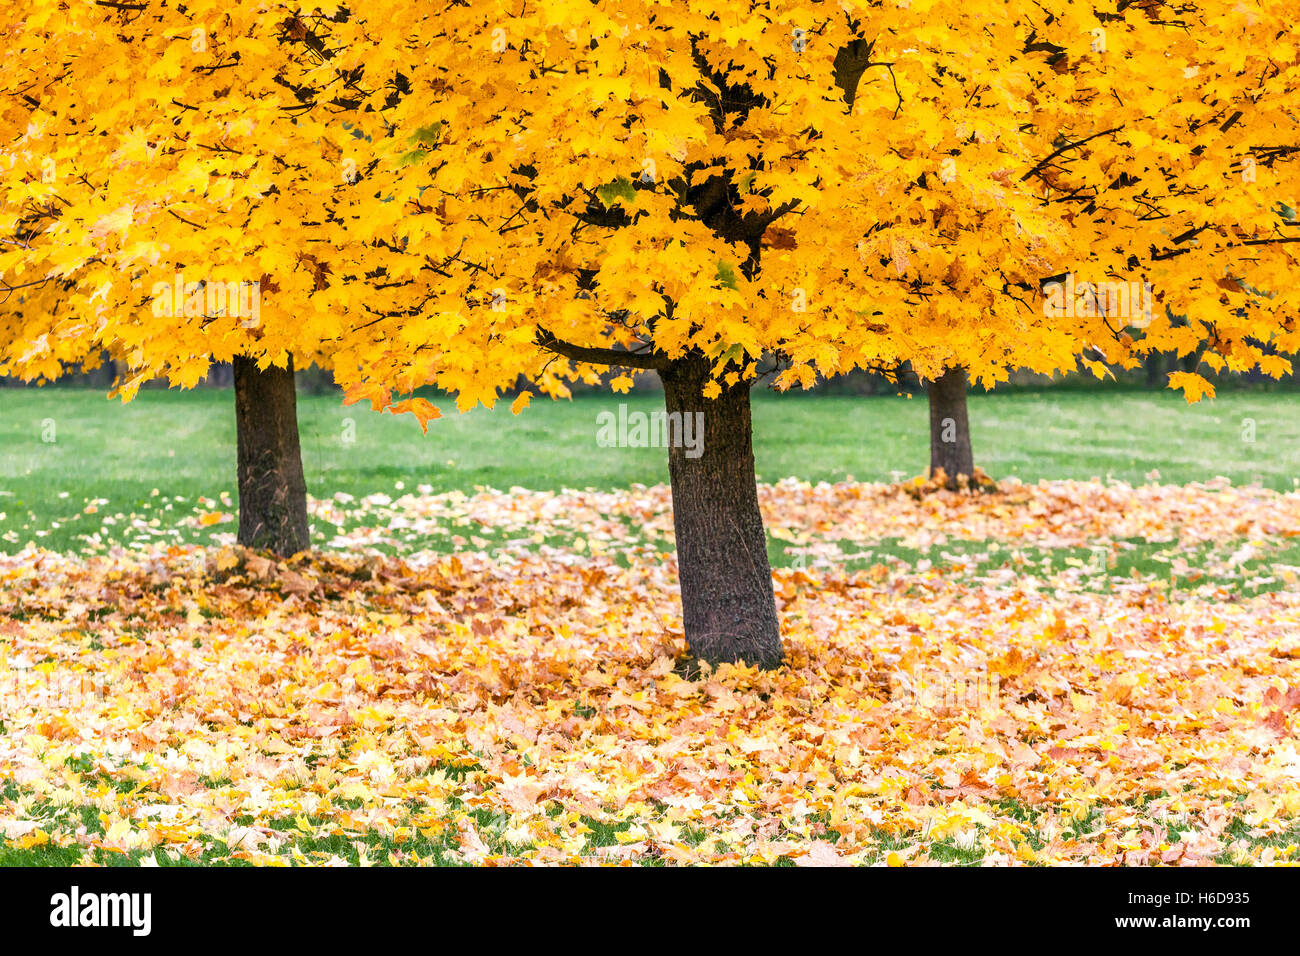 Norway maple trees Acer platanoides in autumn color leaves on the ground Stock Photo